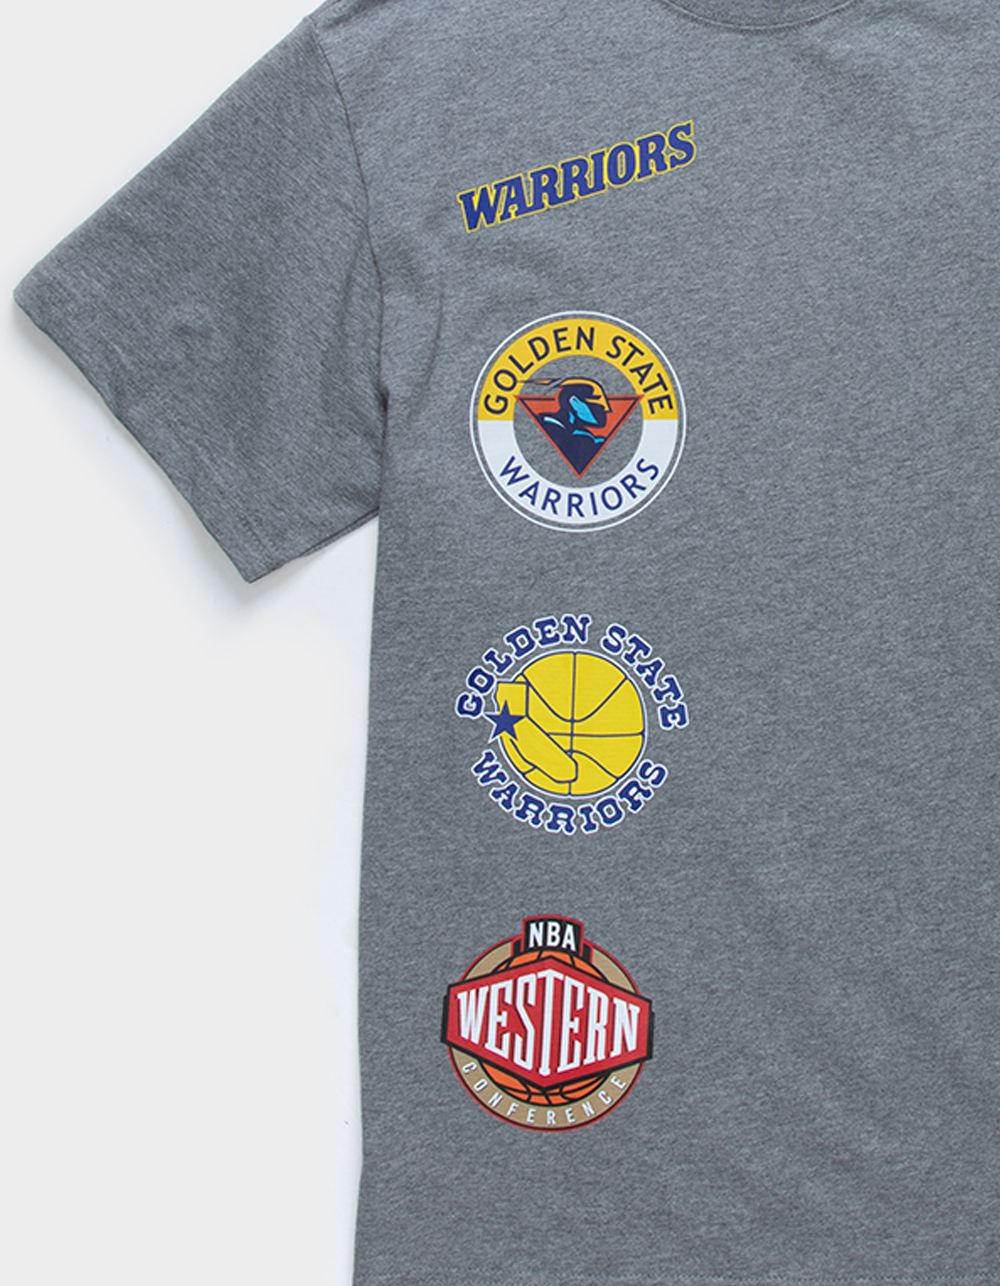 MITCHELL & NESS: BAGS AND ACCESSORIES, MITCHELL AND NESS GOLDEN STATE  WARRIORS